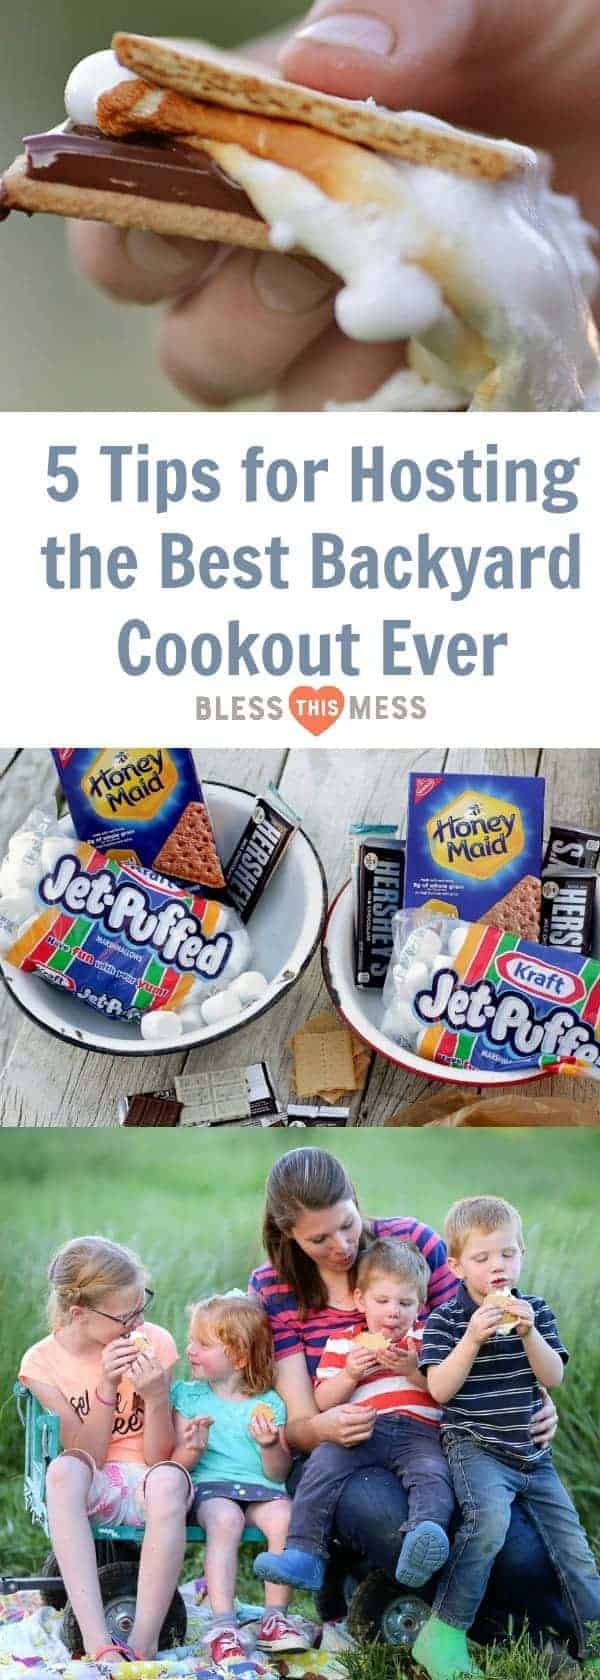 5 Tips for Hosting the Best Backyard Cookout Ever ShareSmore #AD @HoneyMaidSnacks HERSHEY’S Chocolate @KraftJetPuffed